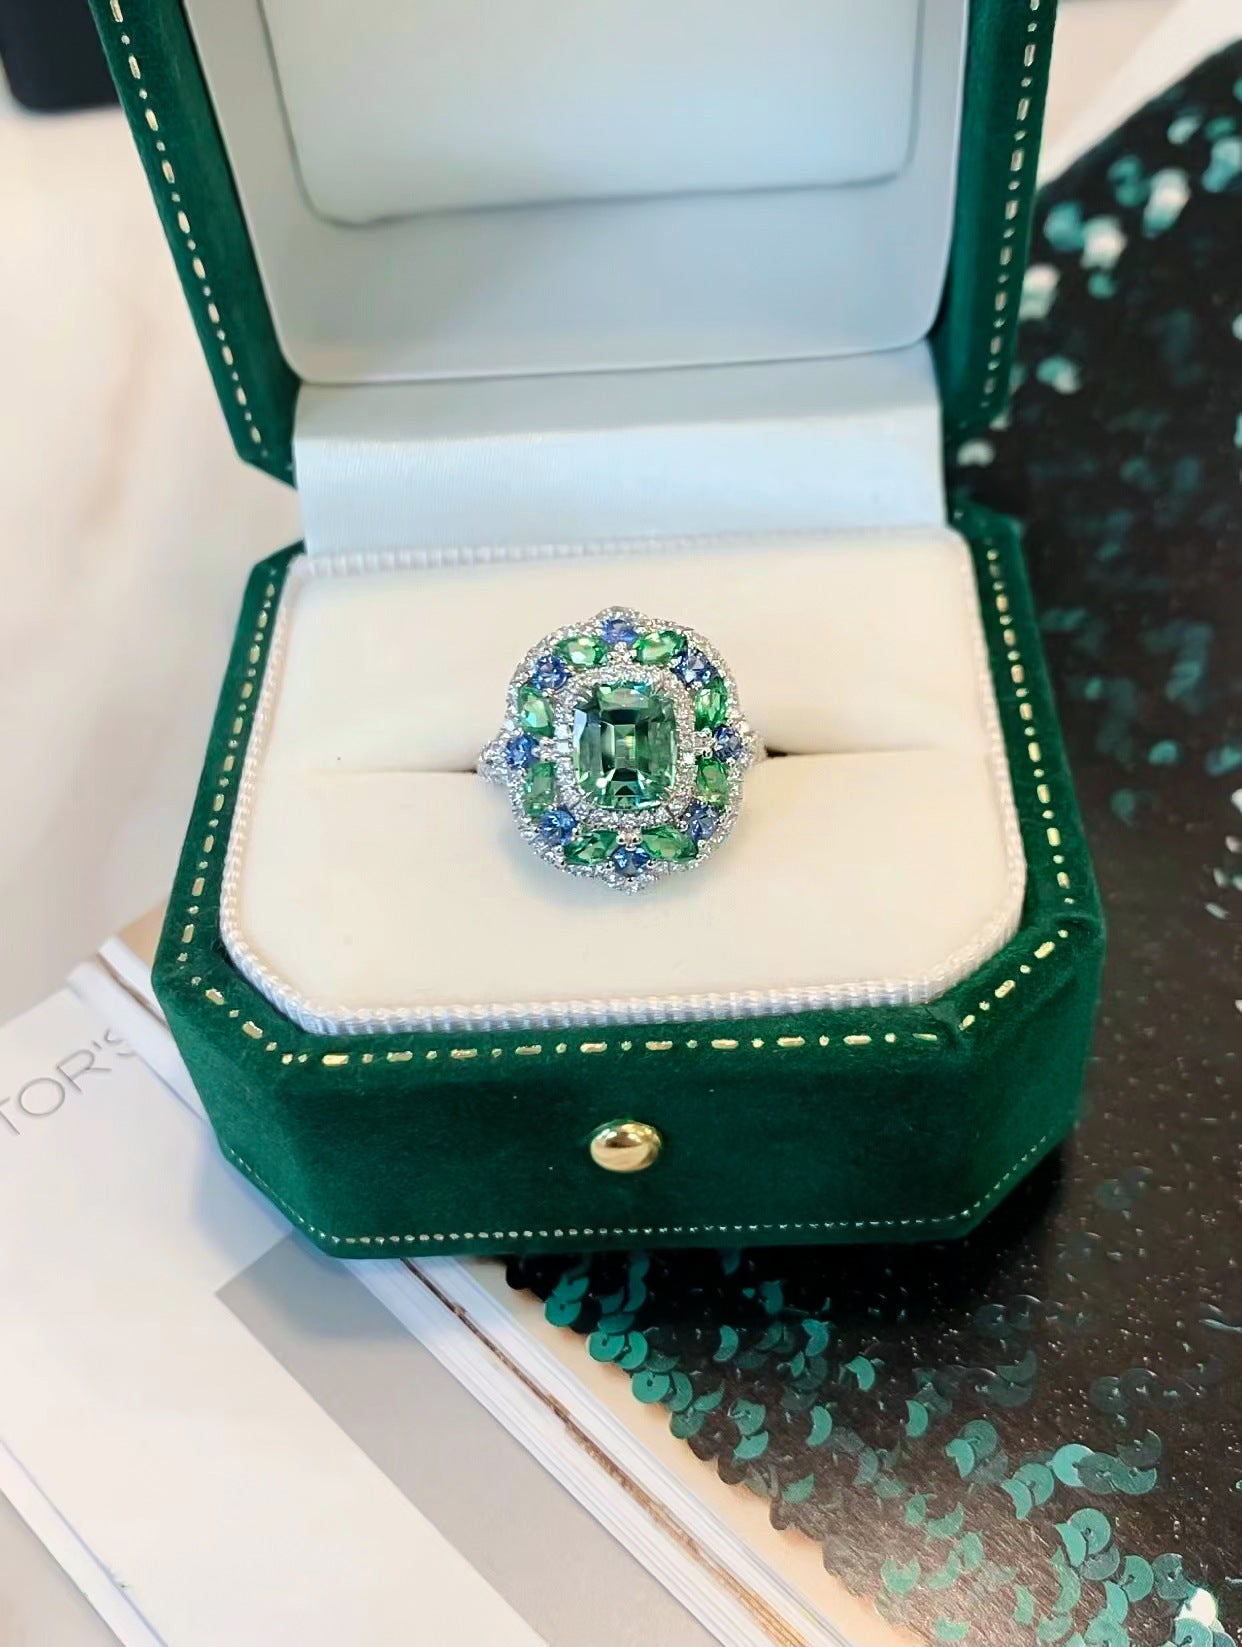 2022 New European And American Style Ring S925 Sterling Silver Secret Garden Afghanistan Green Tourmaline Senior Women's Ring Wholesale